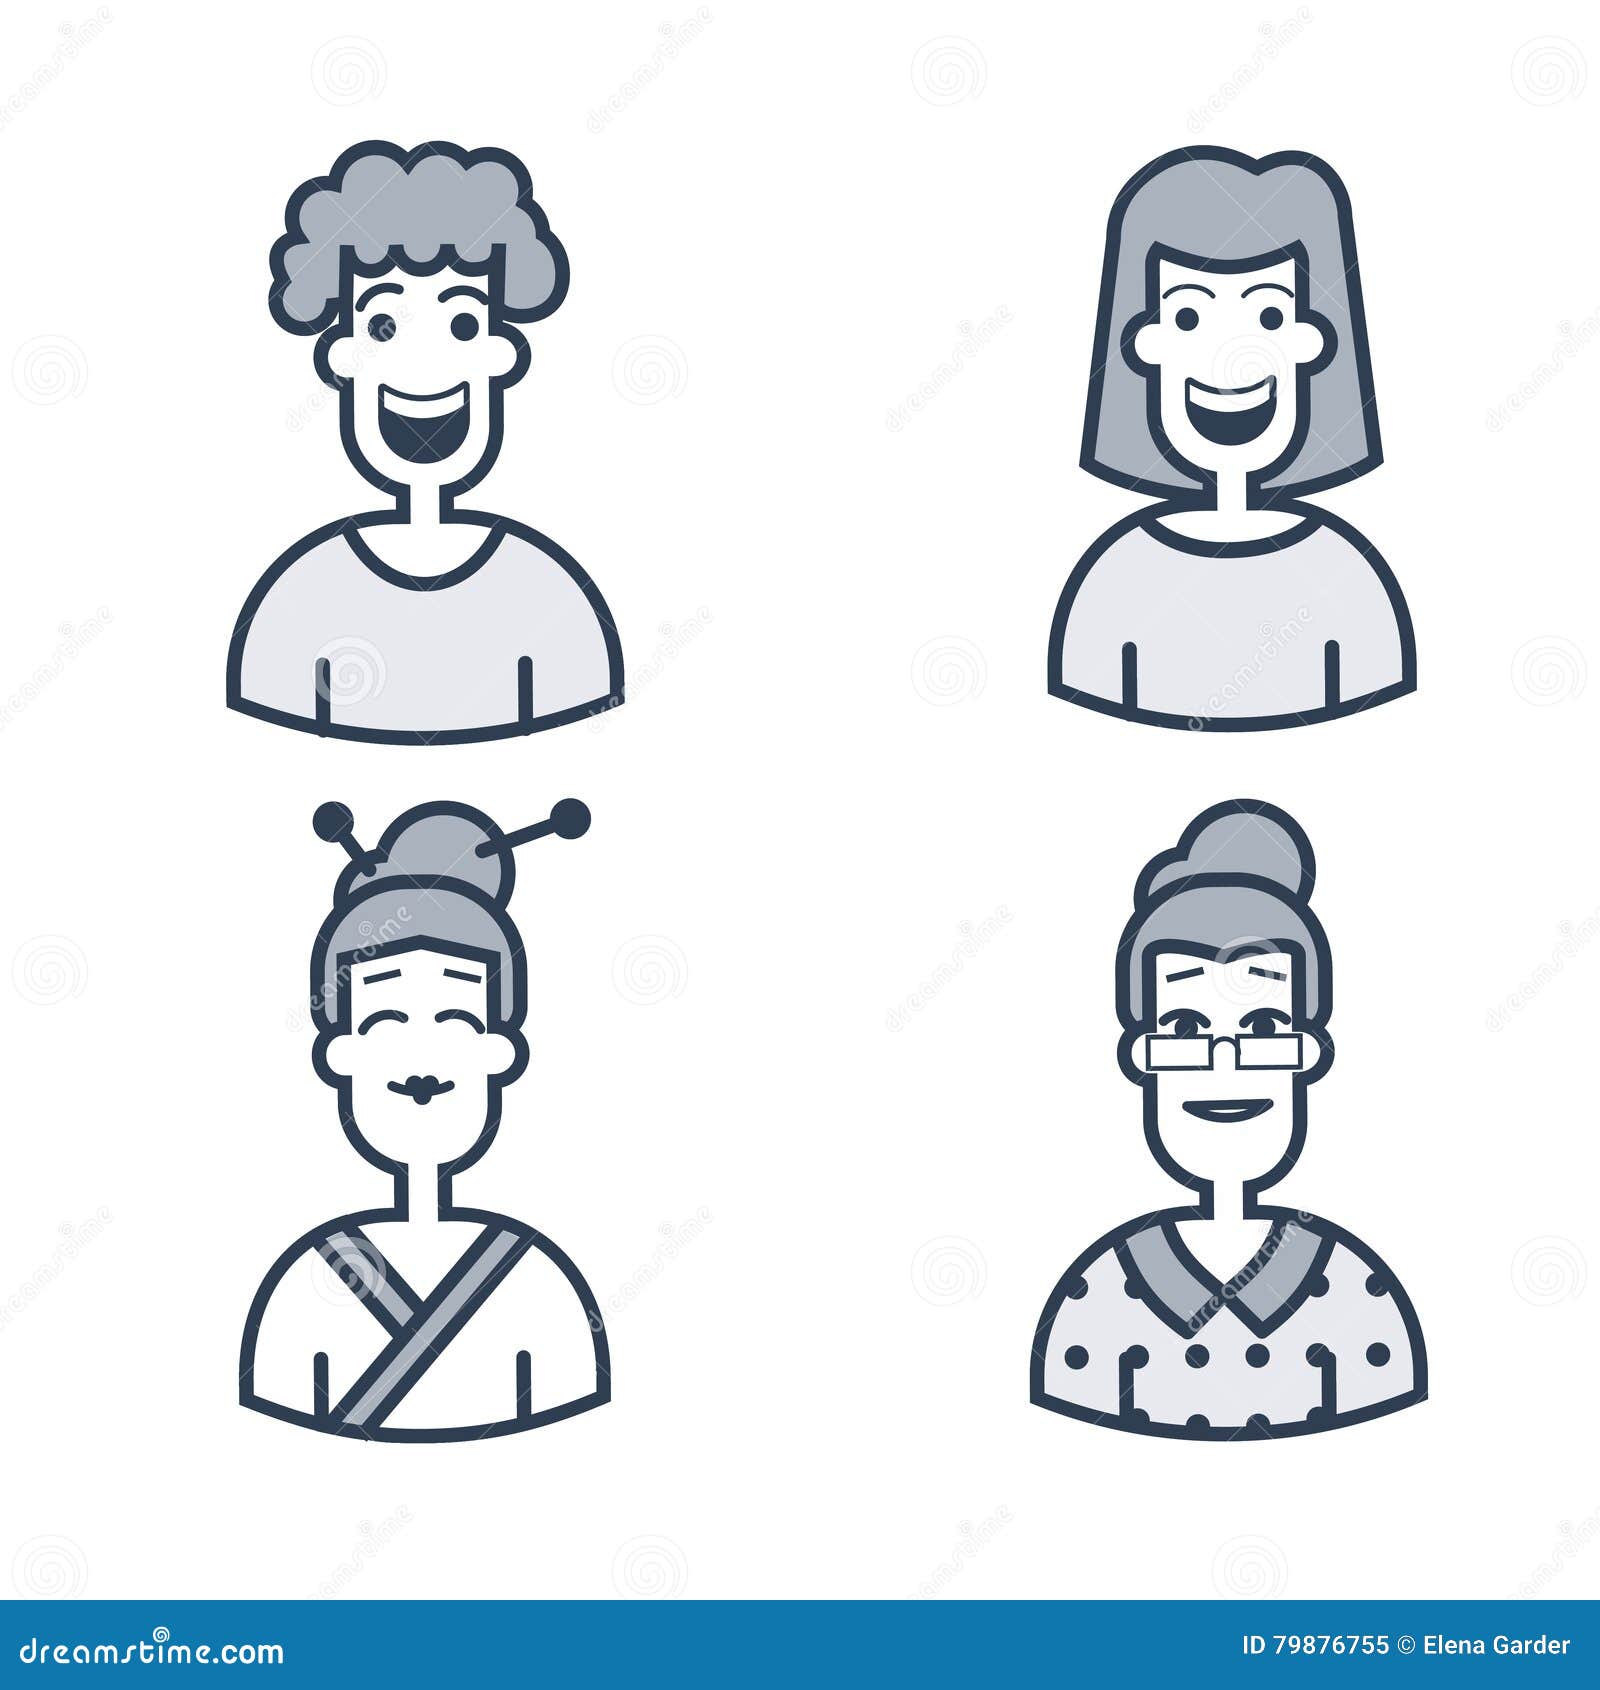 Group Of People Icon Vector Art, Icons, and Graphics for Free Download